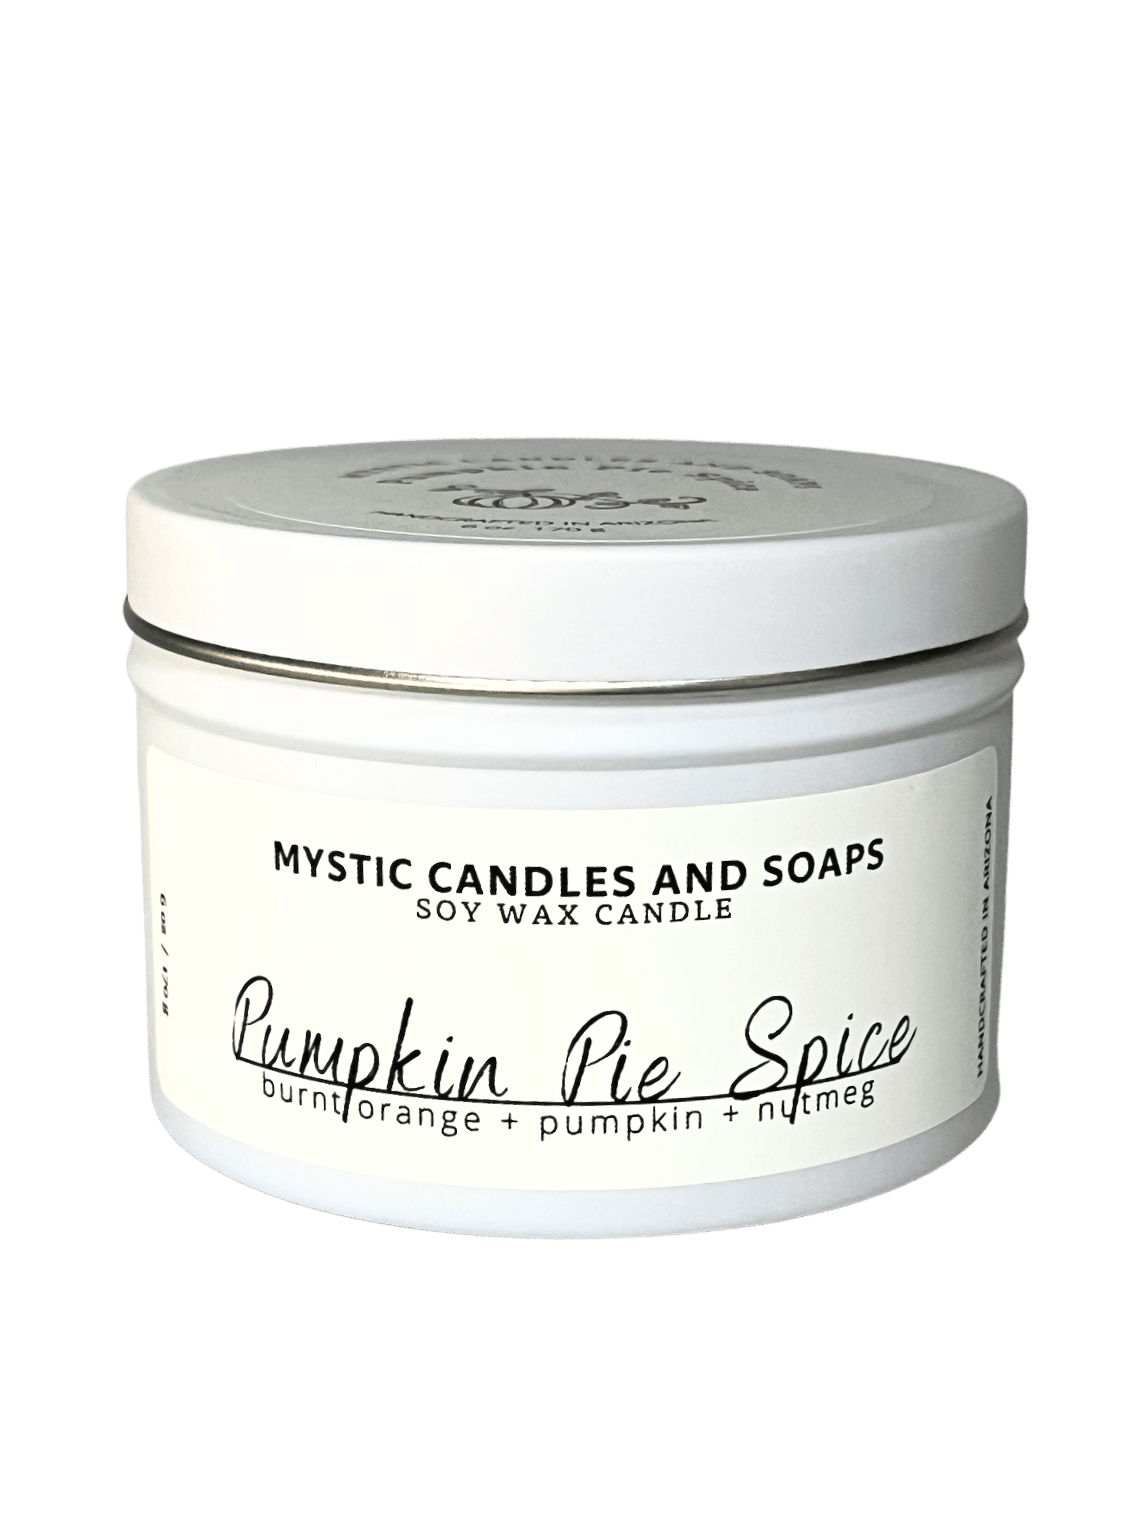 Pumpkin Pie Spice Candle - Mystic Candles and Soaps LLC